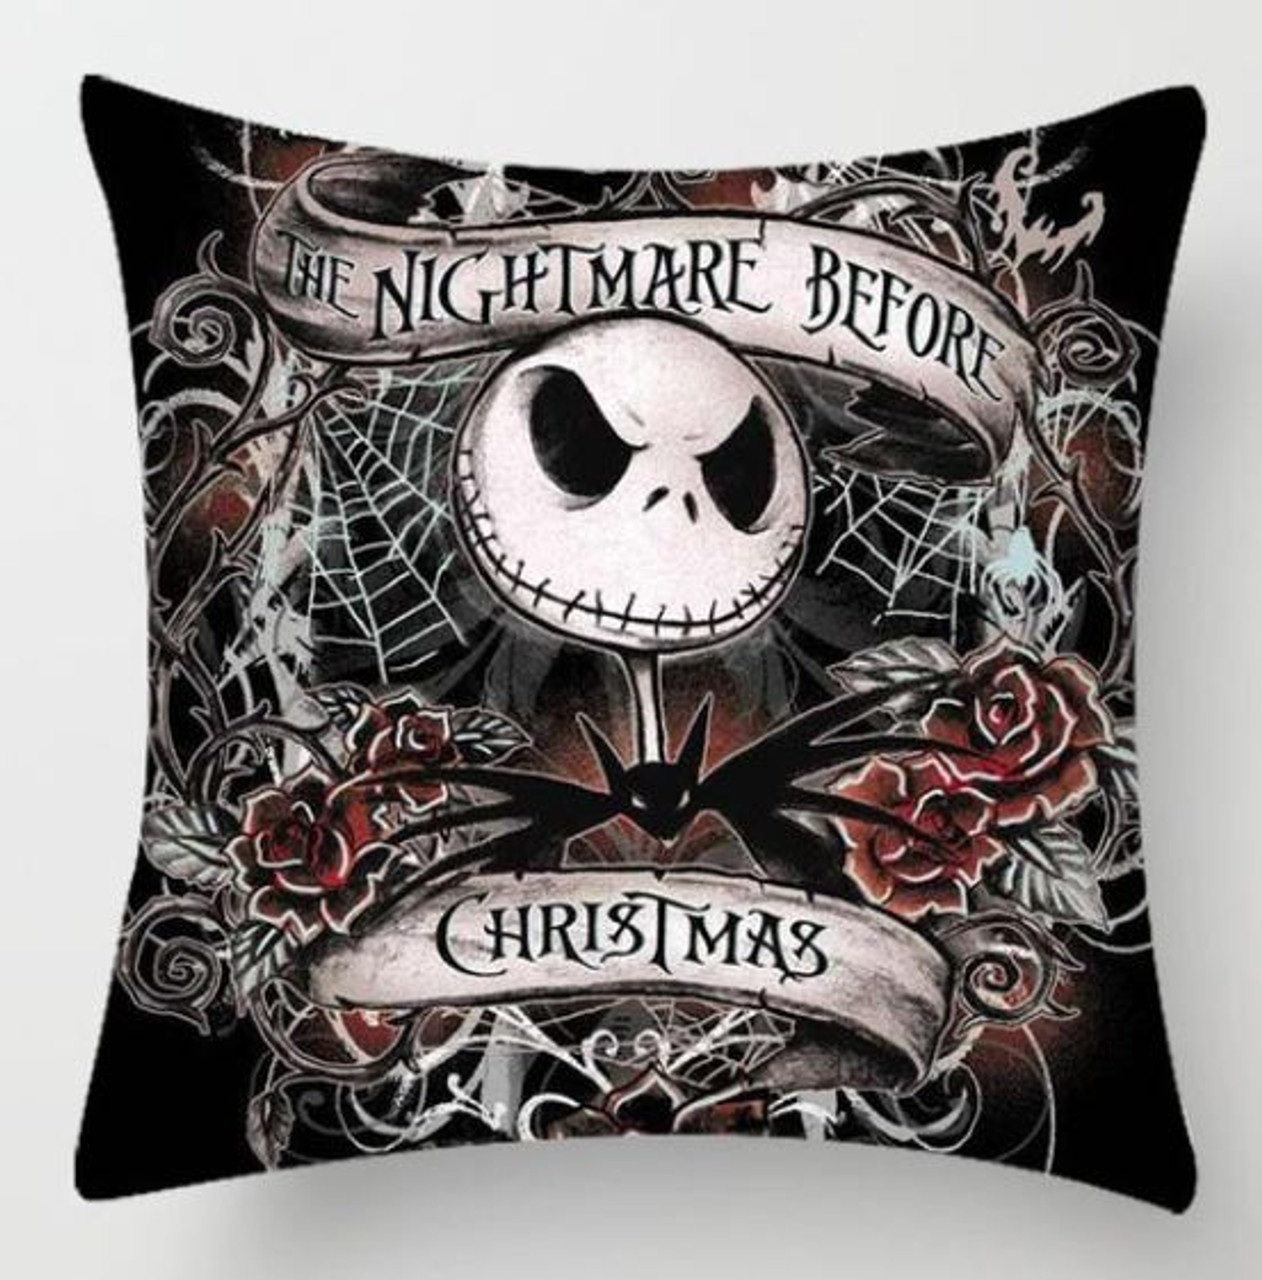 The Nightmare Before Christmas Cushion Cover